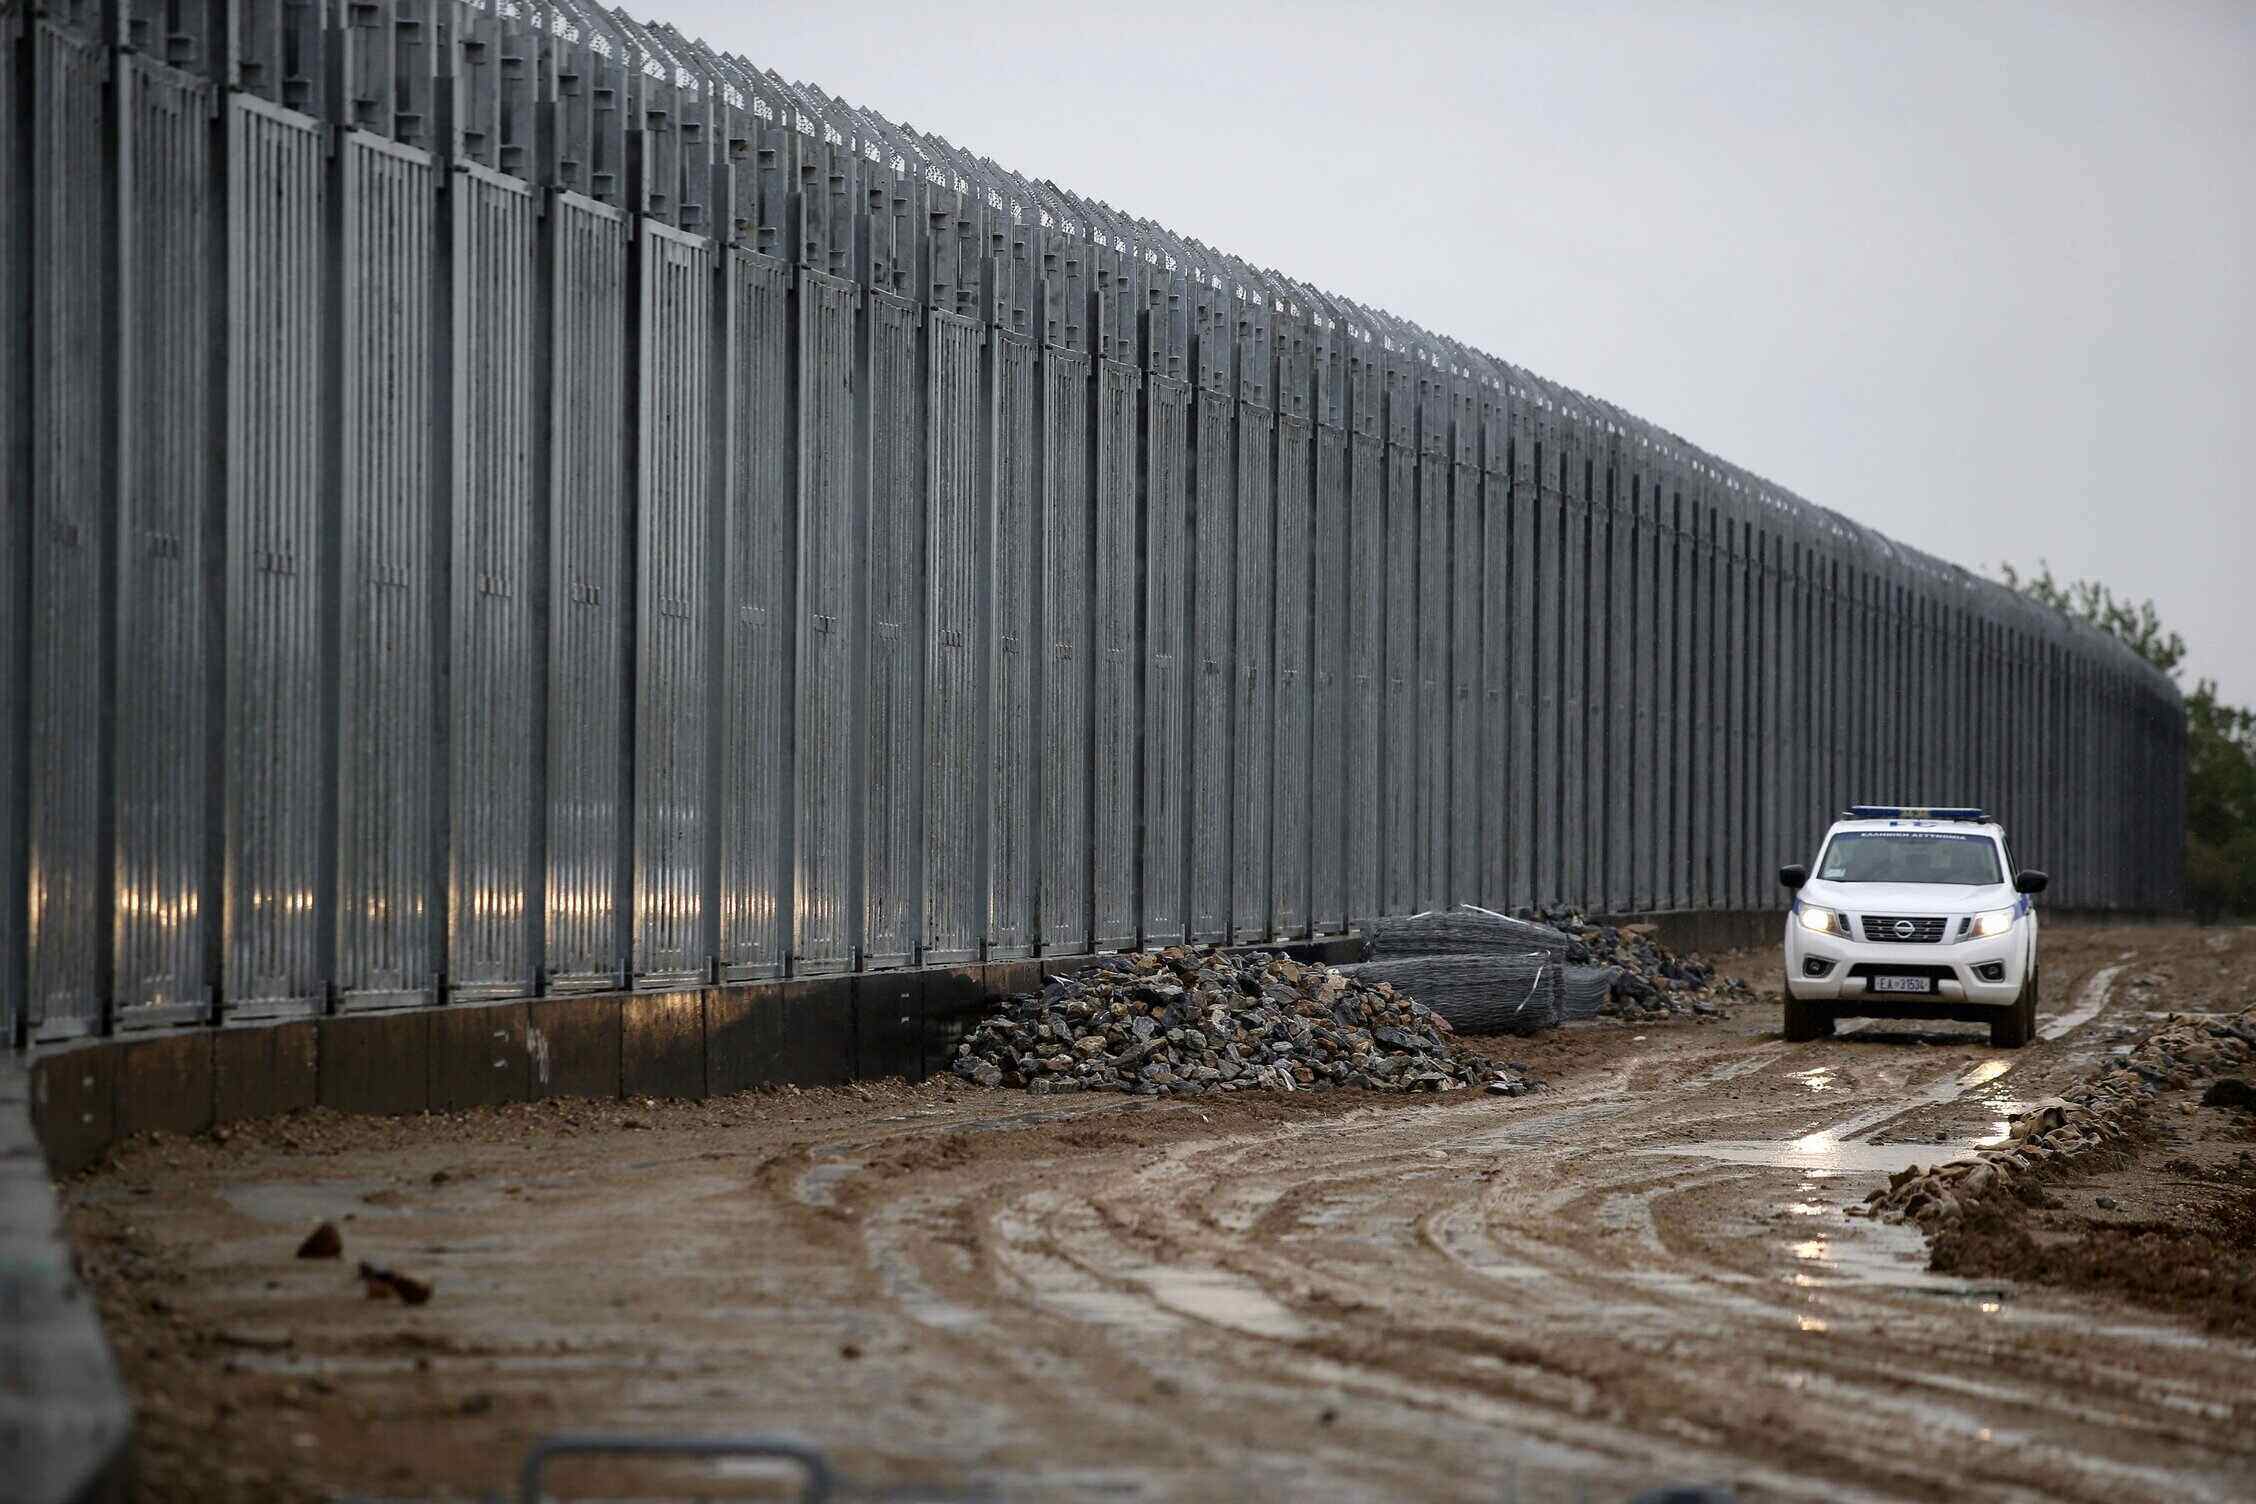 Europe is building anti-migration fences on its borders, and this time with Brussels' support